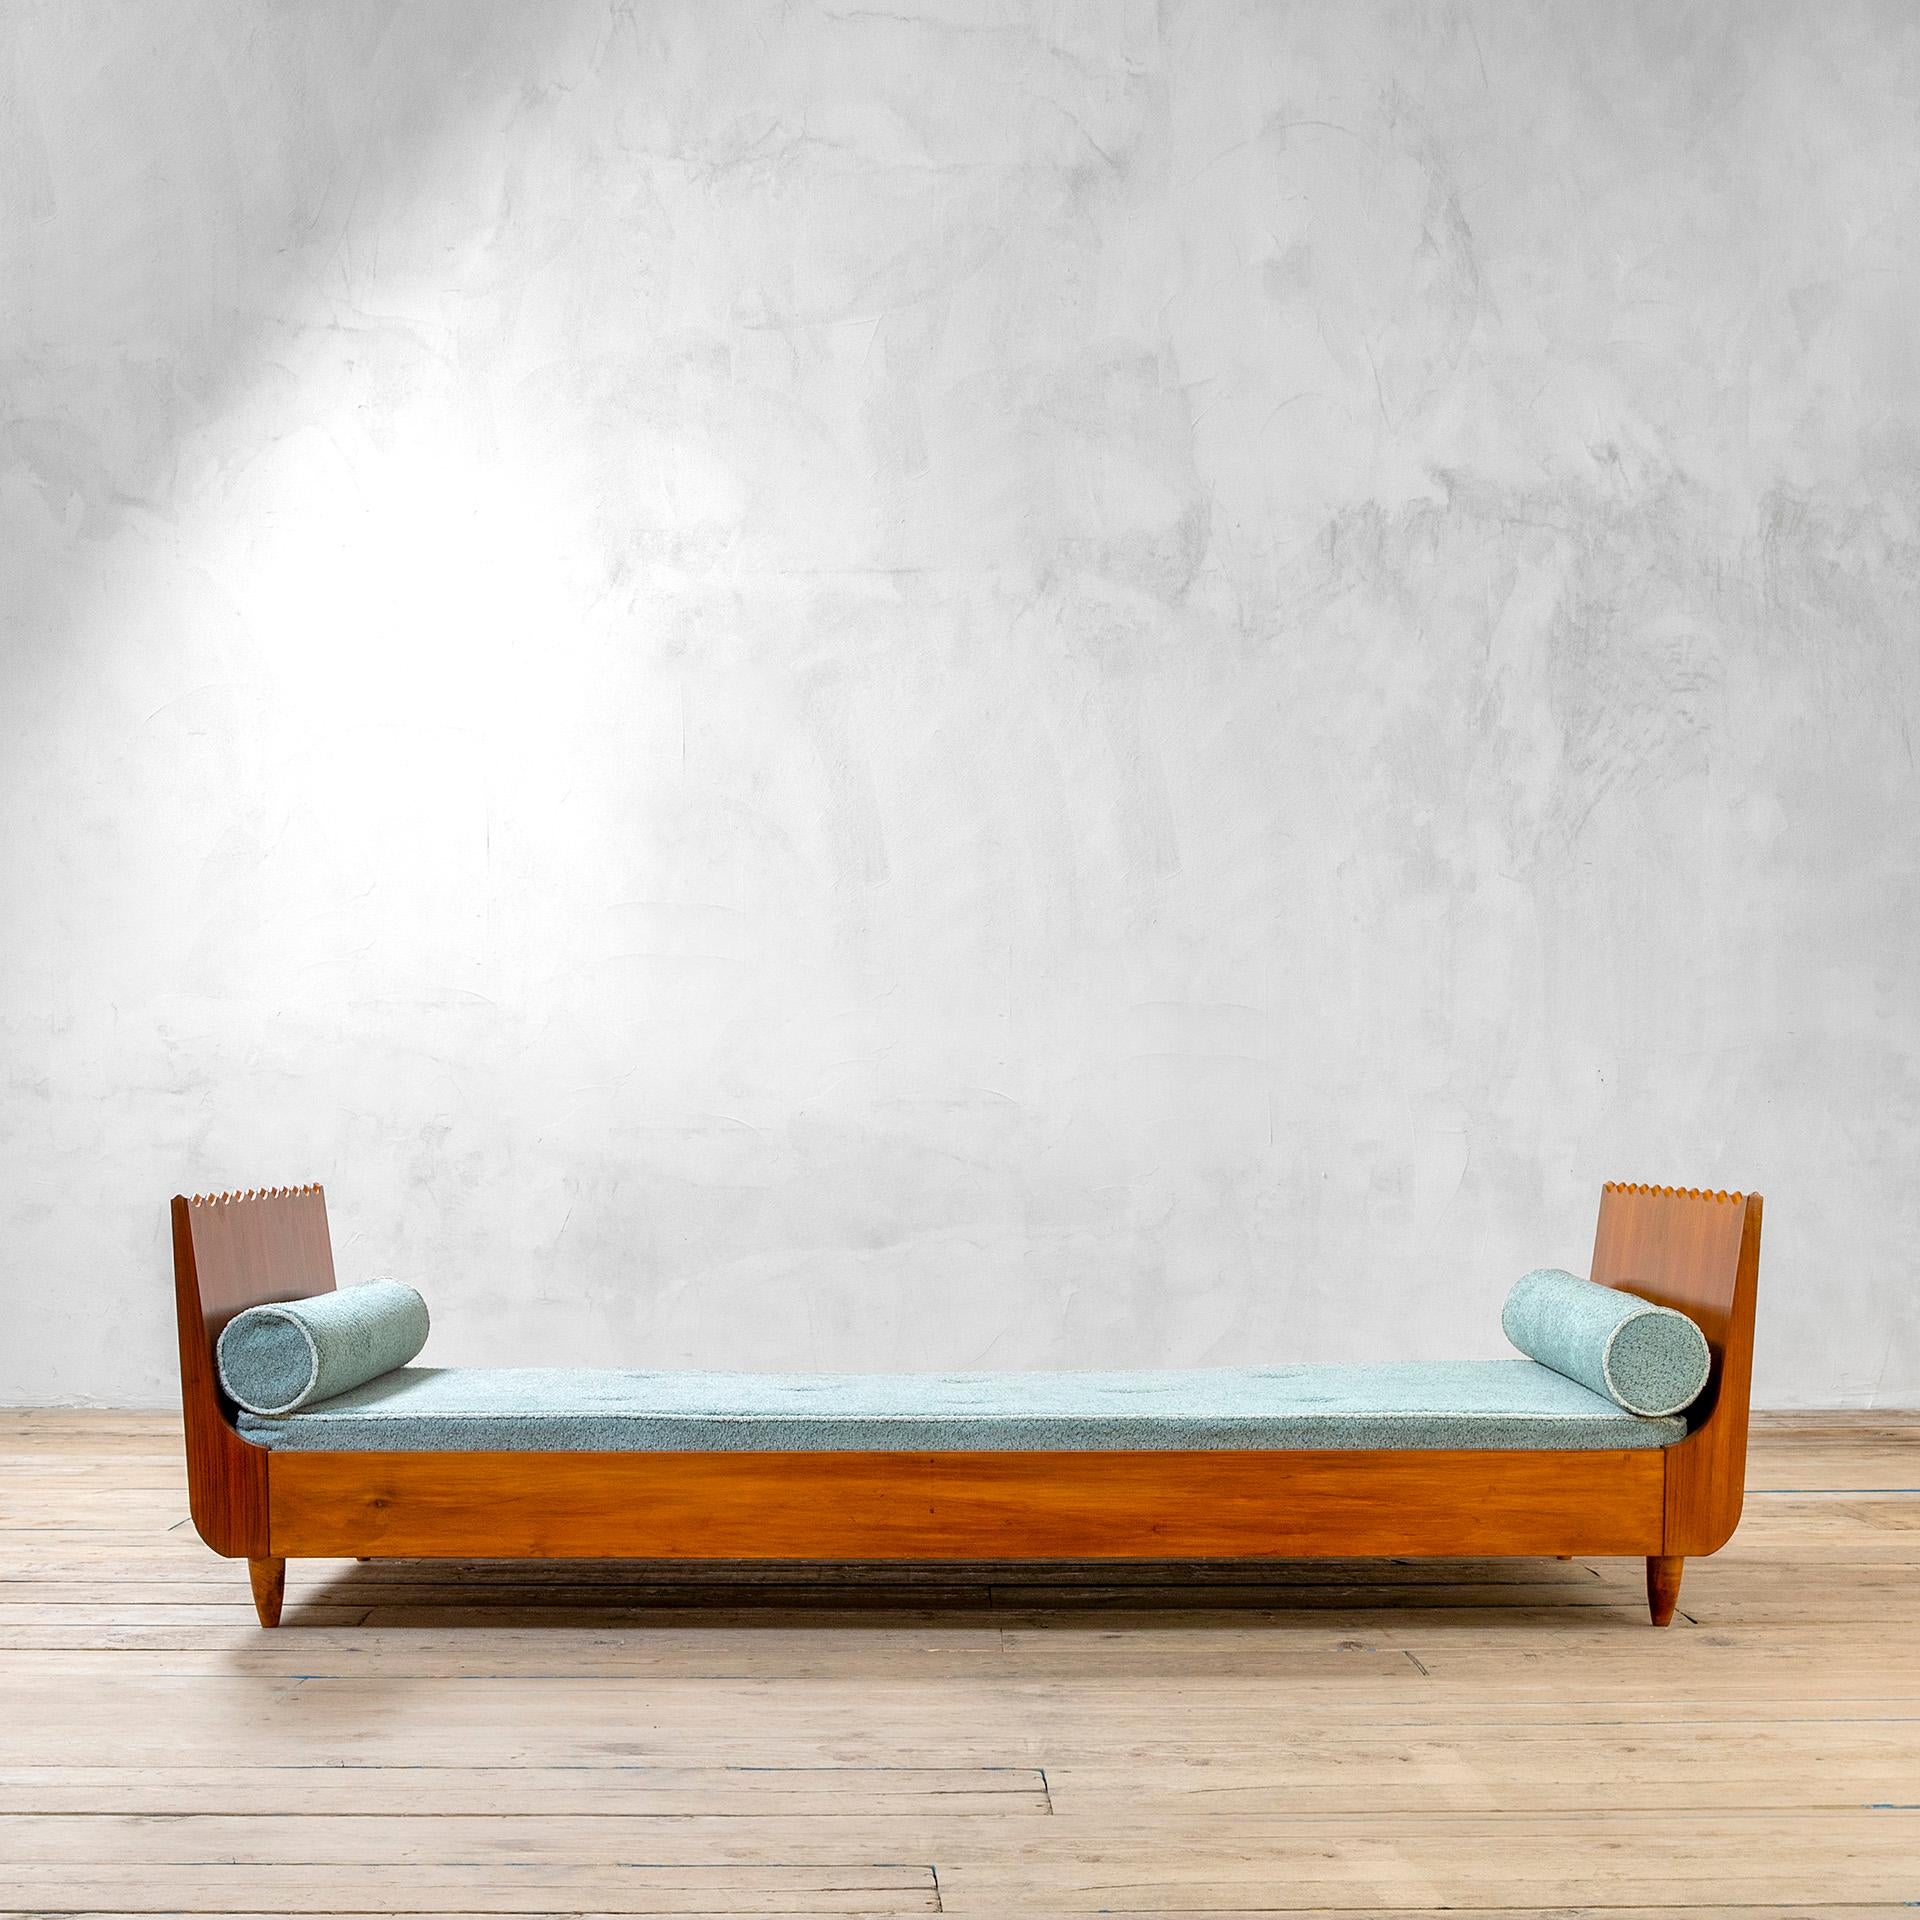 Italian 20th Century Paolo Buffa Wooden Daybed with Mattress for Serafino Arrighi, 1940s For Sale